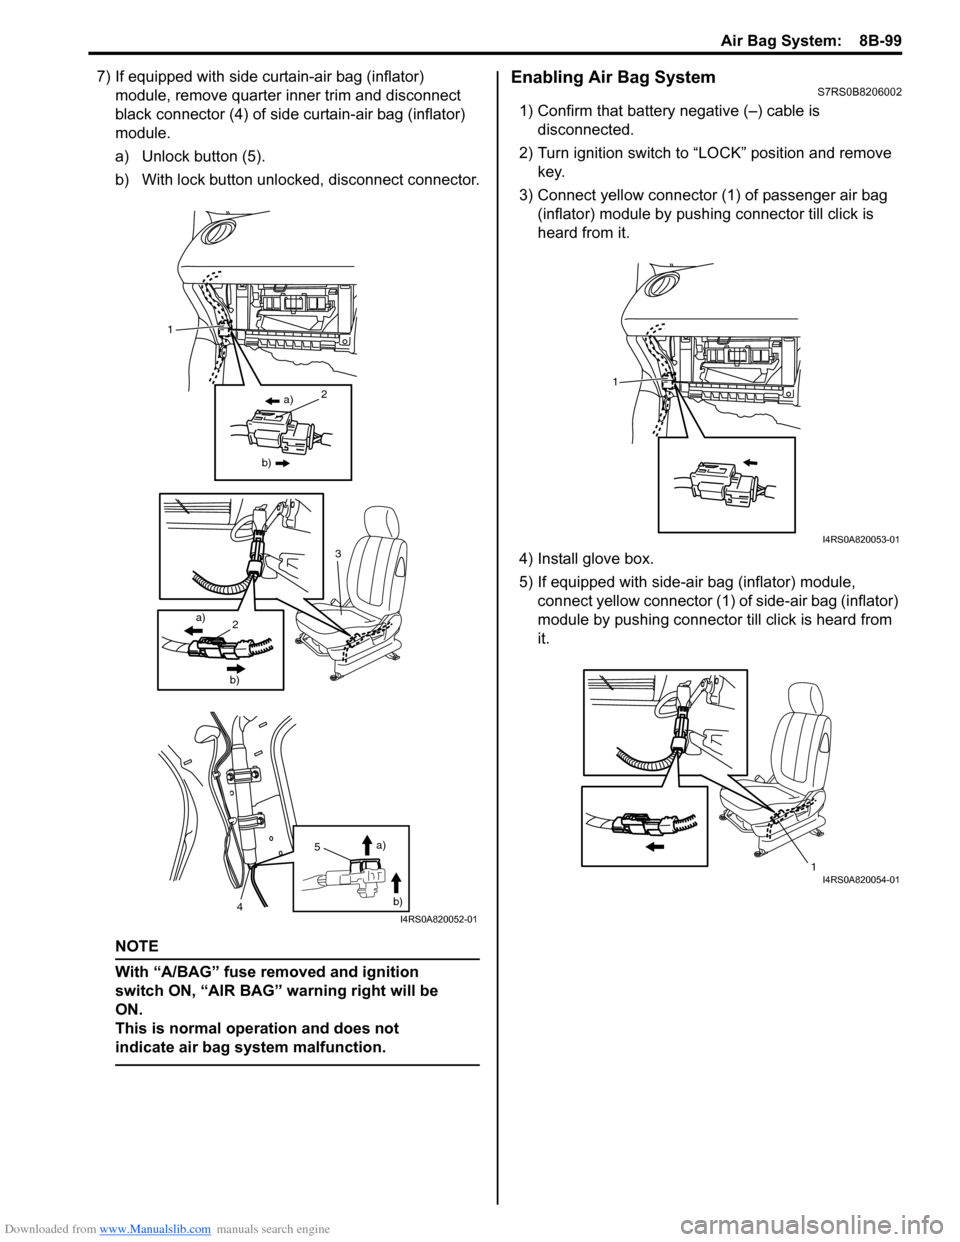 SUZUKI SWIFT 2004 2.G Service Workshop Manual Downloaded from www.Manualslib.com manuals search engine Air Bag System:  8B-99
7) If equipped with side curtain-air bag (inflator) module, remove quarter inner trim and disconnect 
black connector (4